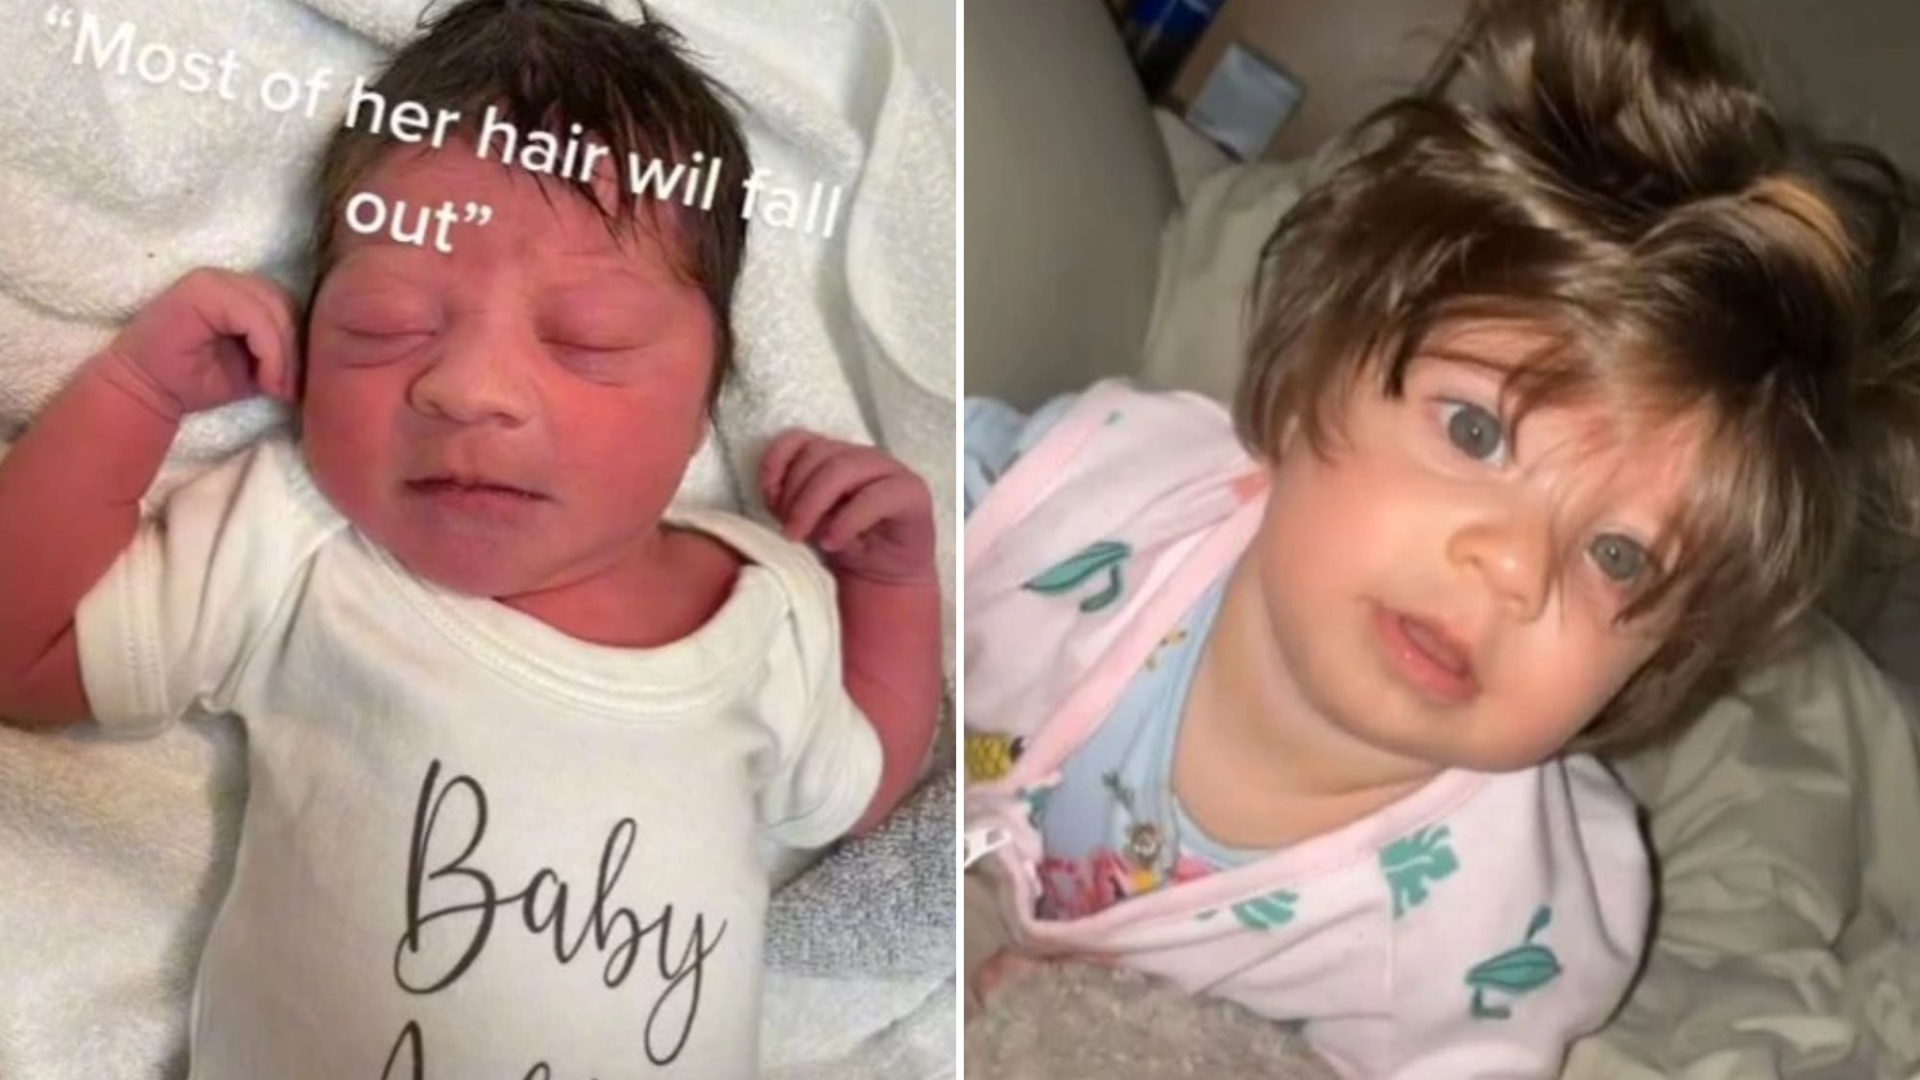 I was told my baby’s hair would fall out by 6 months but now people say she looks like a Stranger Things heartthrob